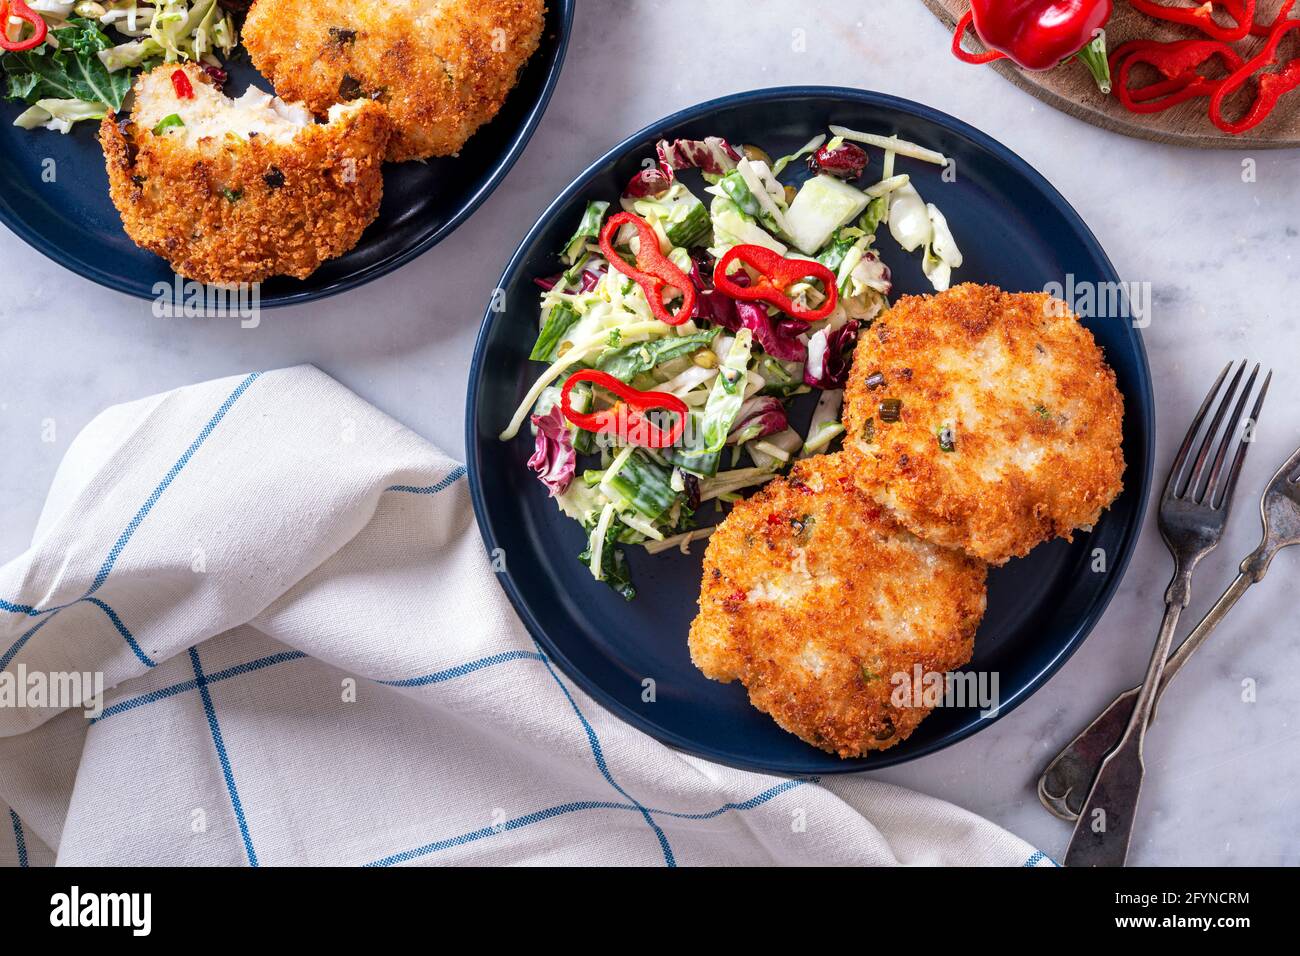 Delicious panko crusted fish cakes with coleslaw and red pepper. Stock Photo